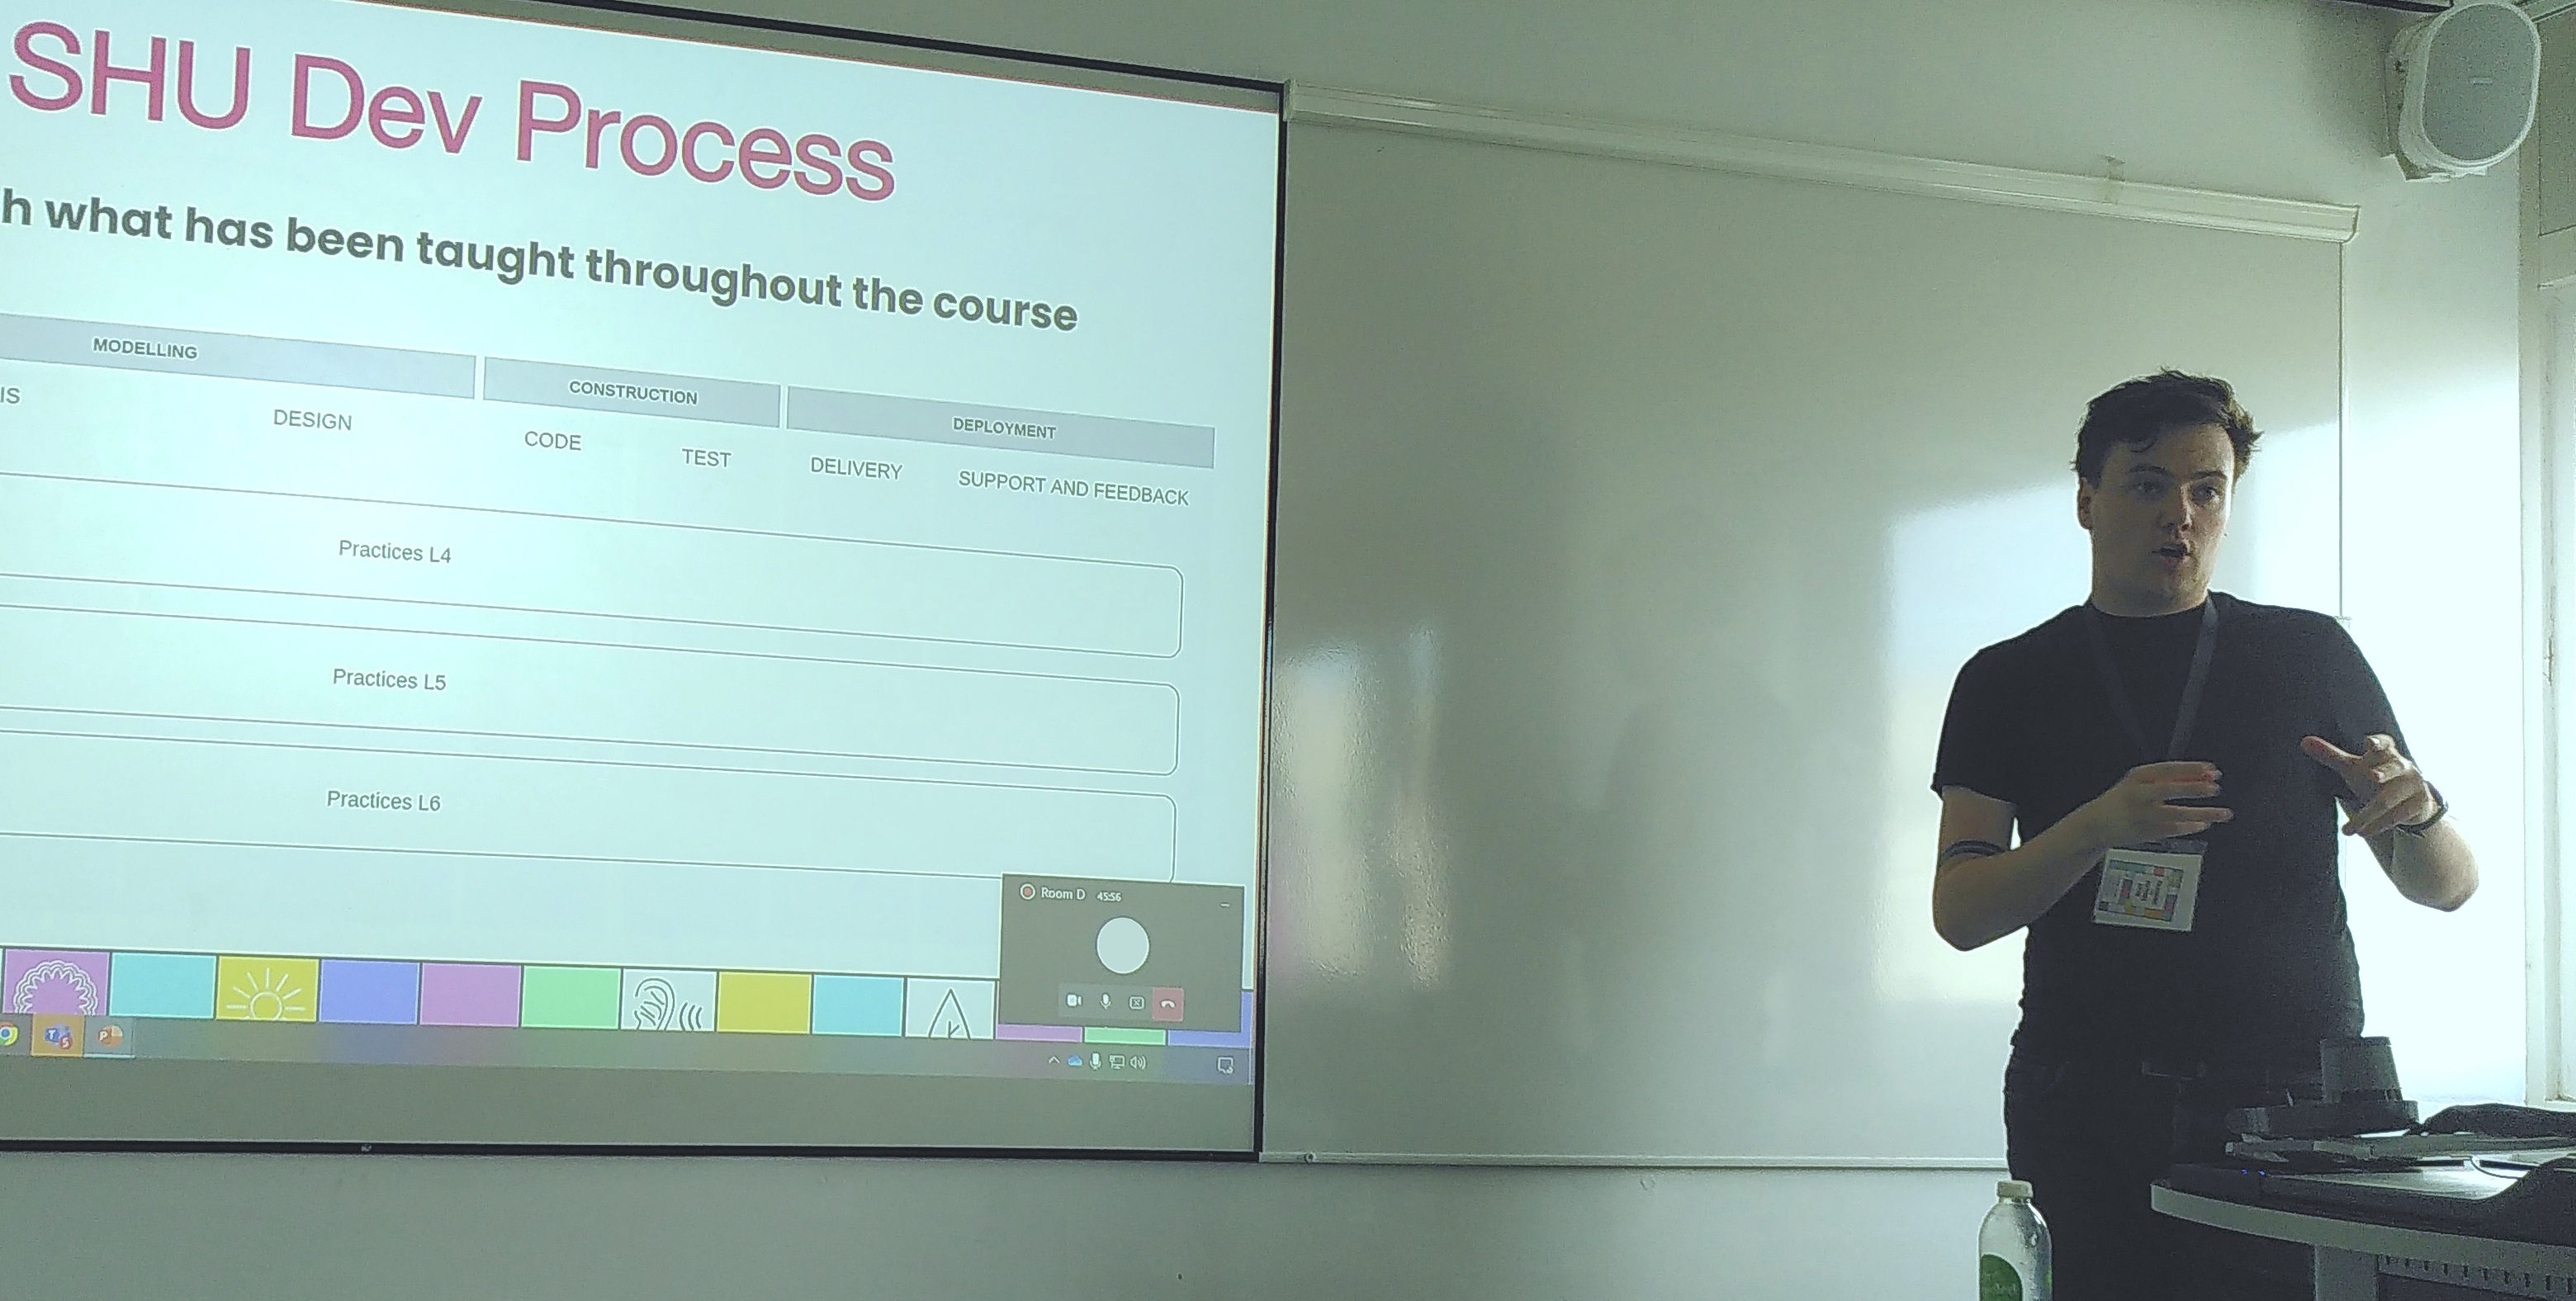 Jack explaining the general structure of the SHU Dev Process being projected on the screen. The diagram shows the high-level structure of the process in terms of its different phases and the levels of complexity that can be added to different levels of studies.